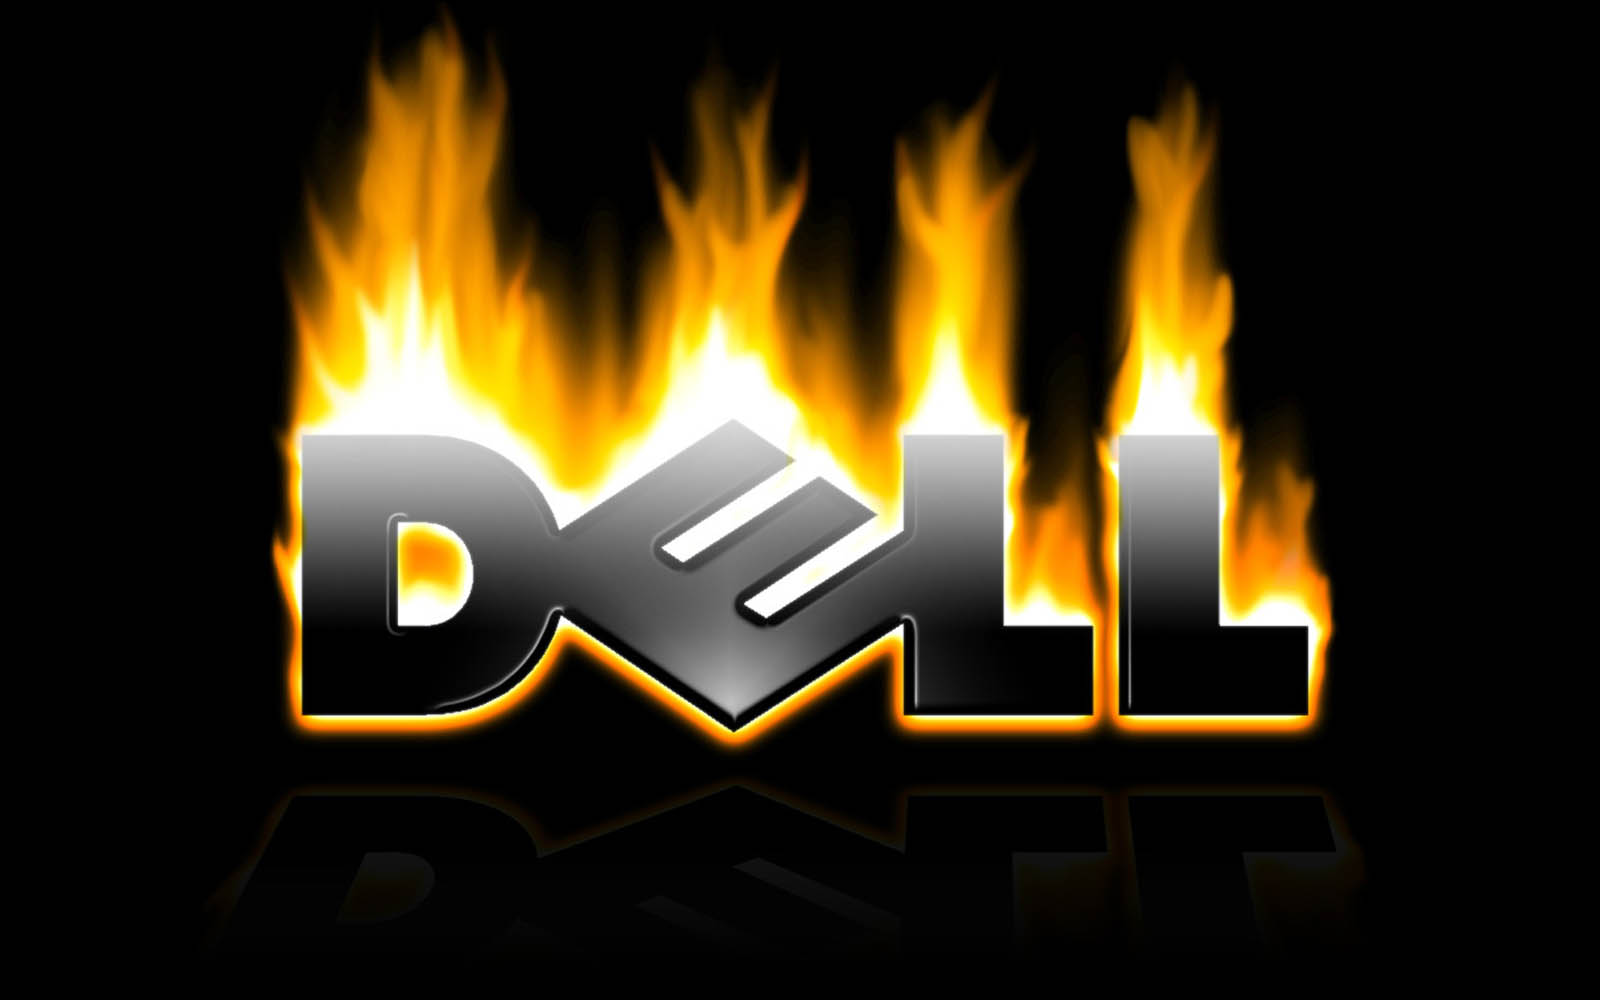 Dell Desktop Background Wallpaper Collection Of Background For